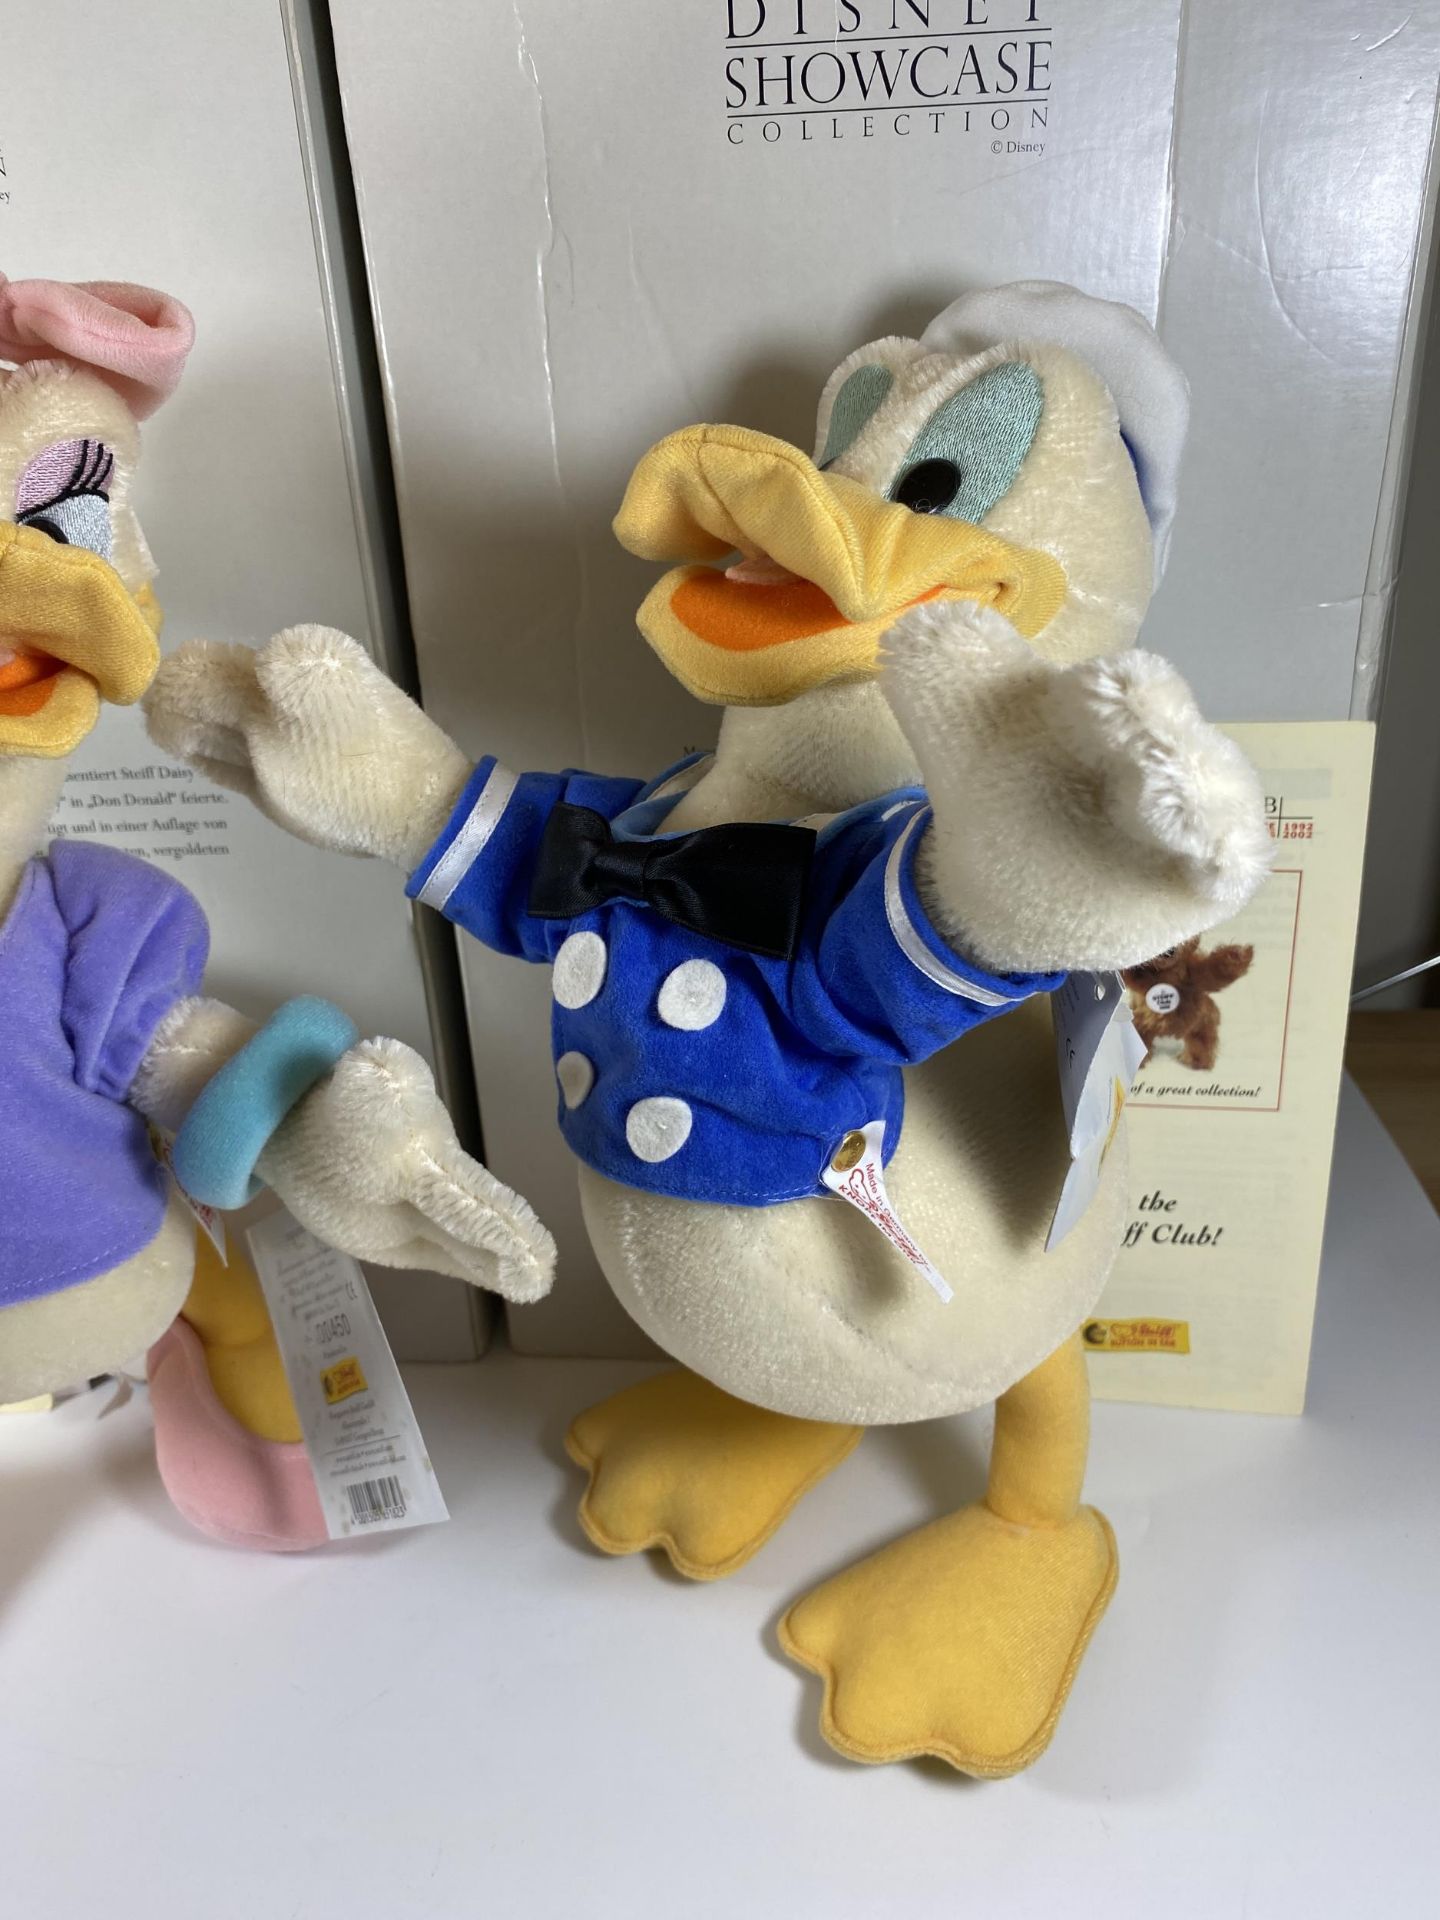 A PAIR OF LIMITED EDITION STEIFF MOHAIR DISNEY SHOWCASE COLLECTION SOFT TOY FIGURES, BOTH BOXED - Image 4 of 8